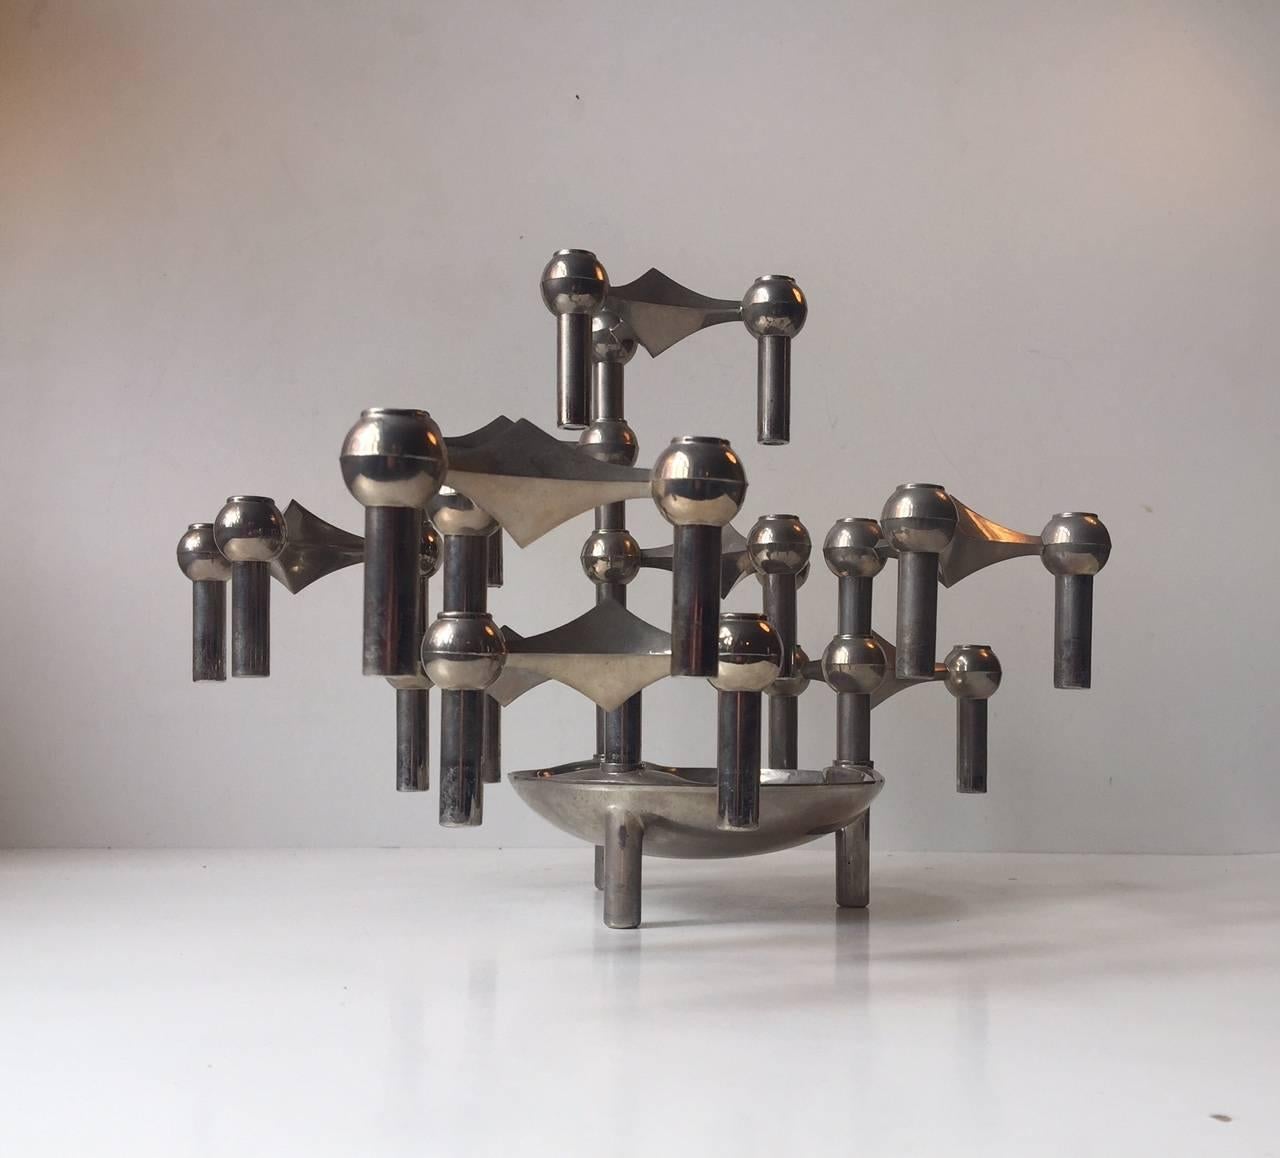 A molecular/atomic looking sculpture made of nine individual candleholders and a bowl or base. The system is designed by Caesar Stoffi and Fritz Nagel for BMF in Germany during the 1960s. This modular design can be configured in an endless number of